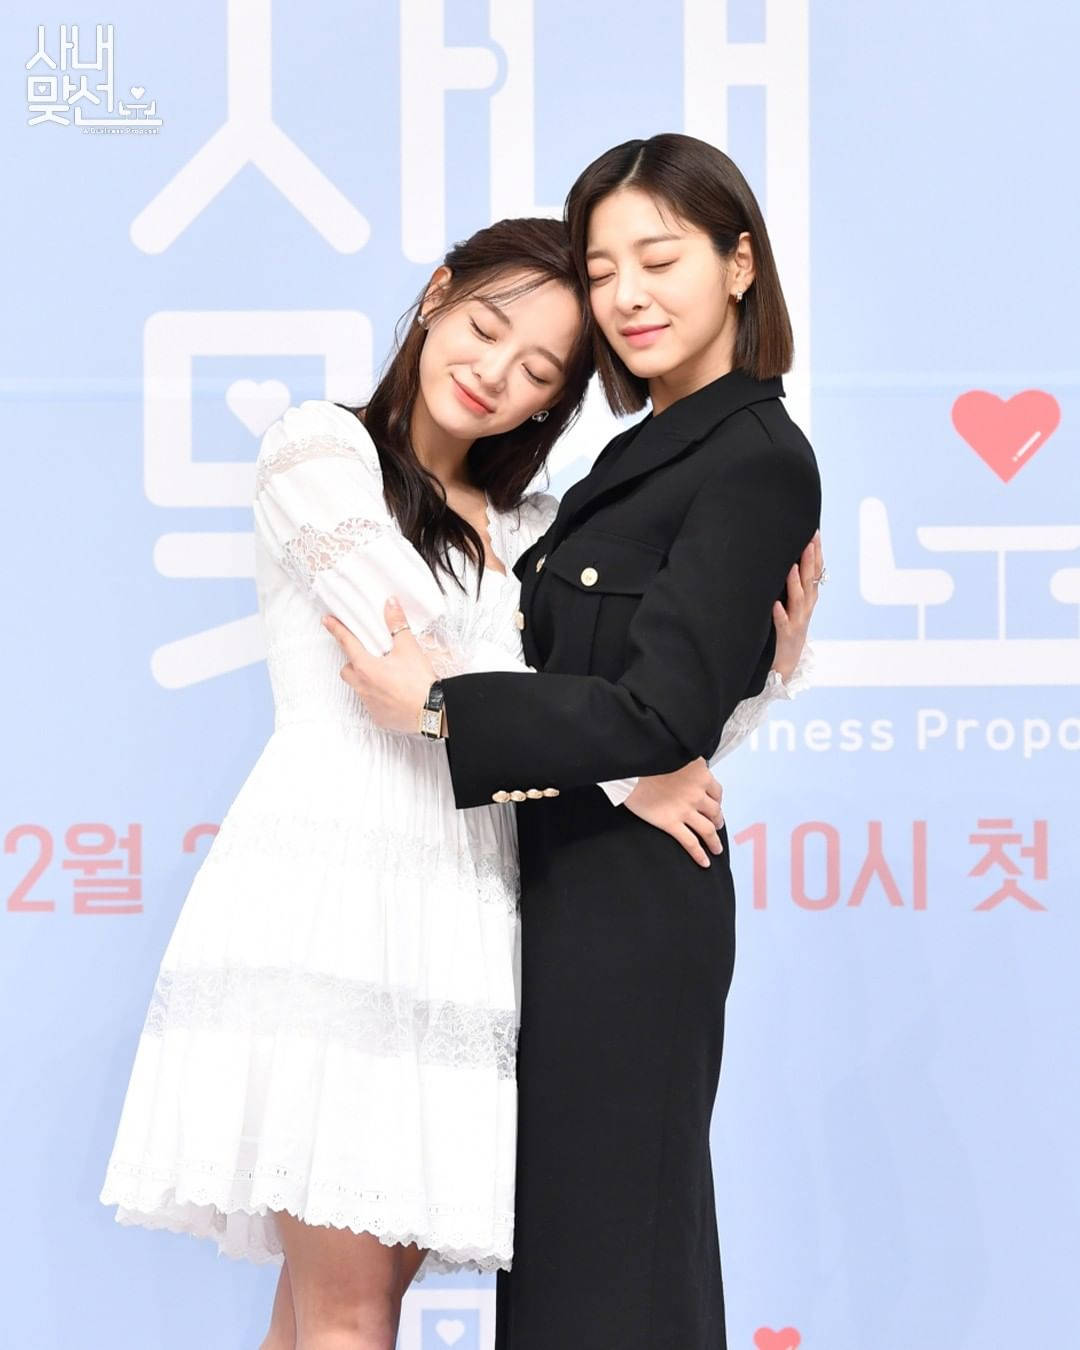 Young-seo And Ha-ri Business Proposal Bestfriends Background